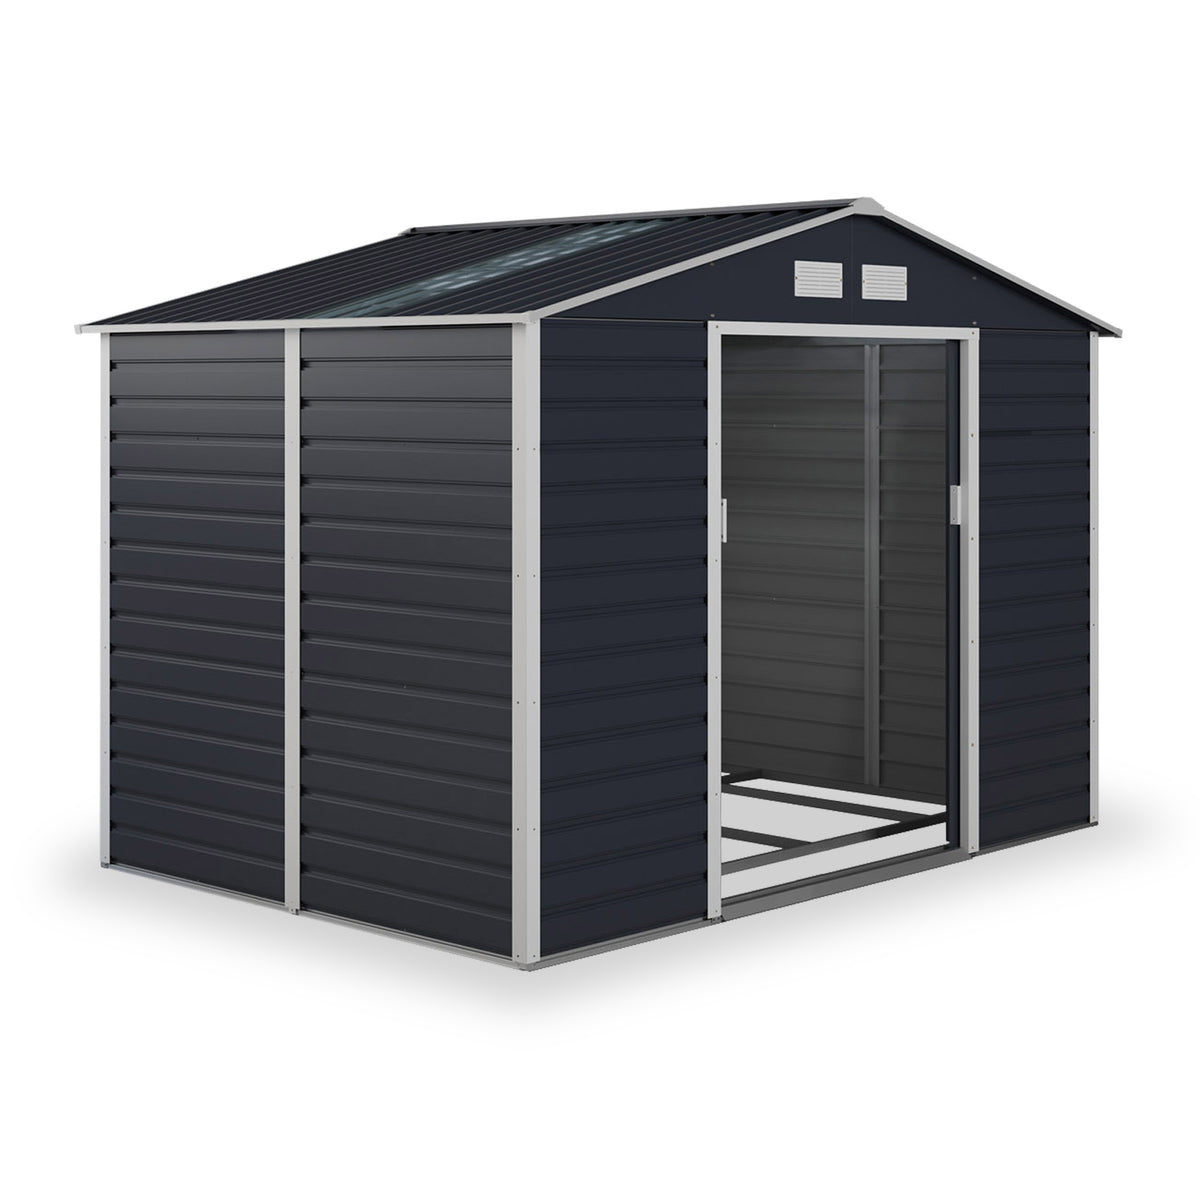 Cambridge 9 x 10 ft Galvanised Steel Shed from Roseland Furniture